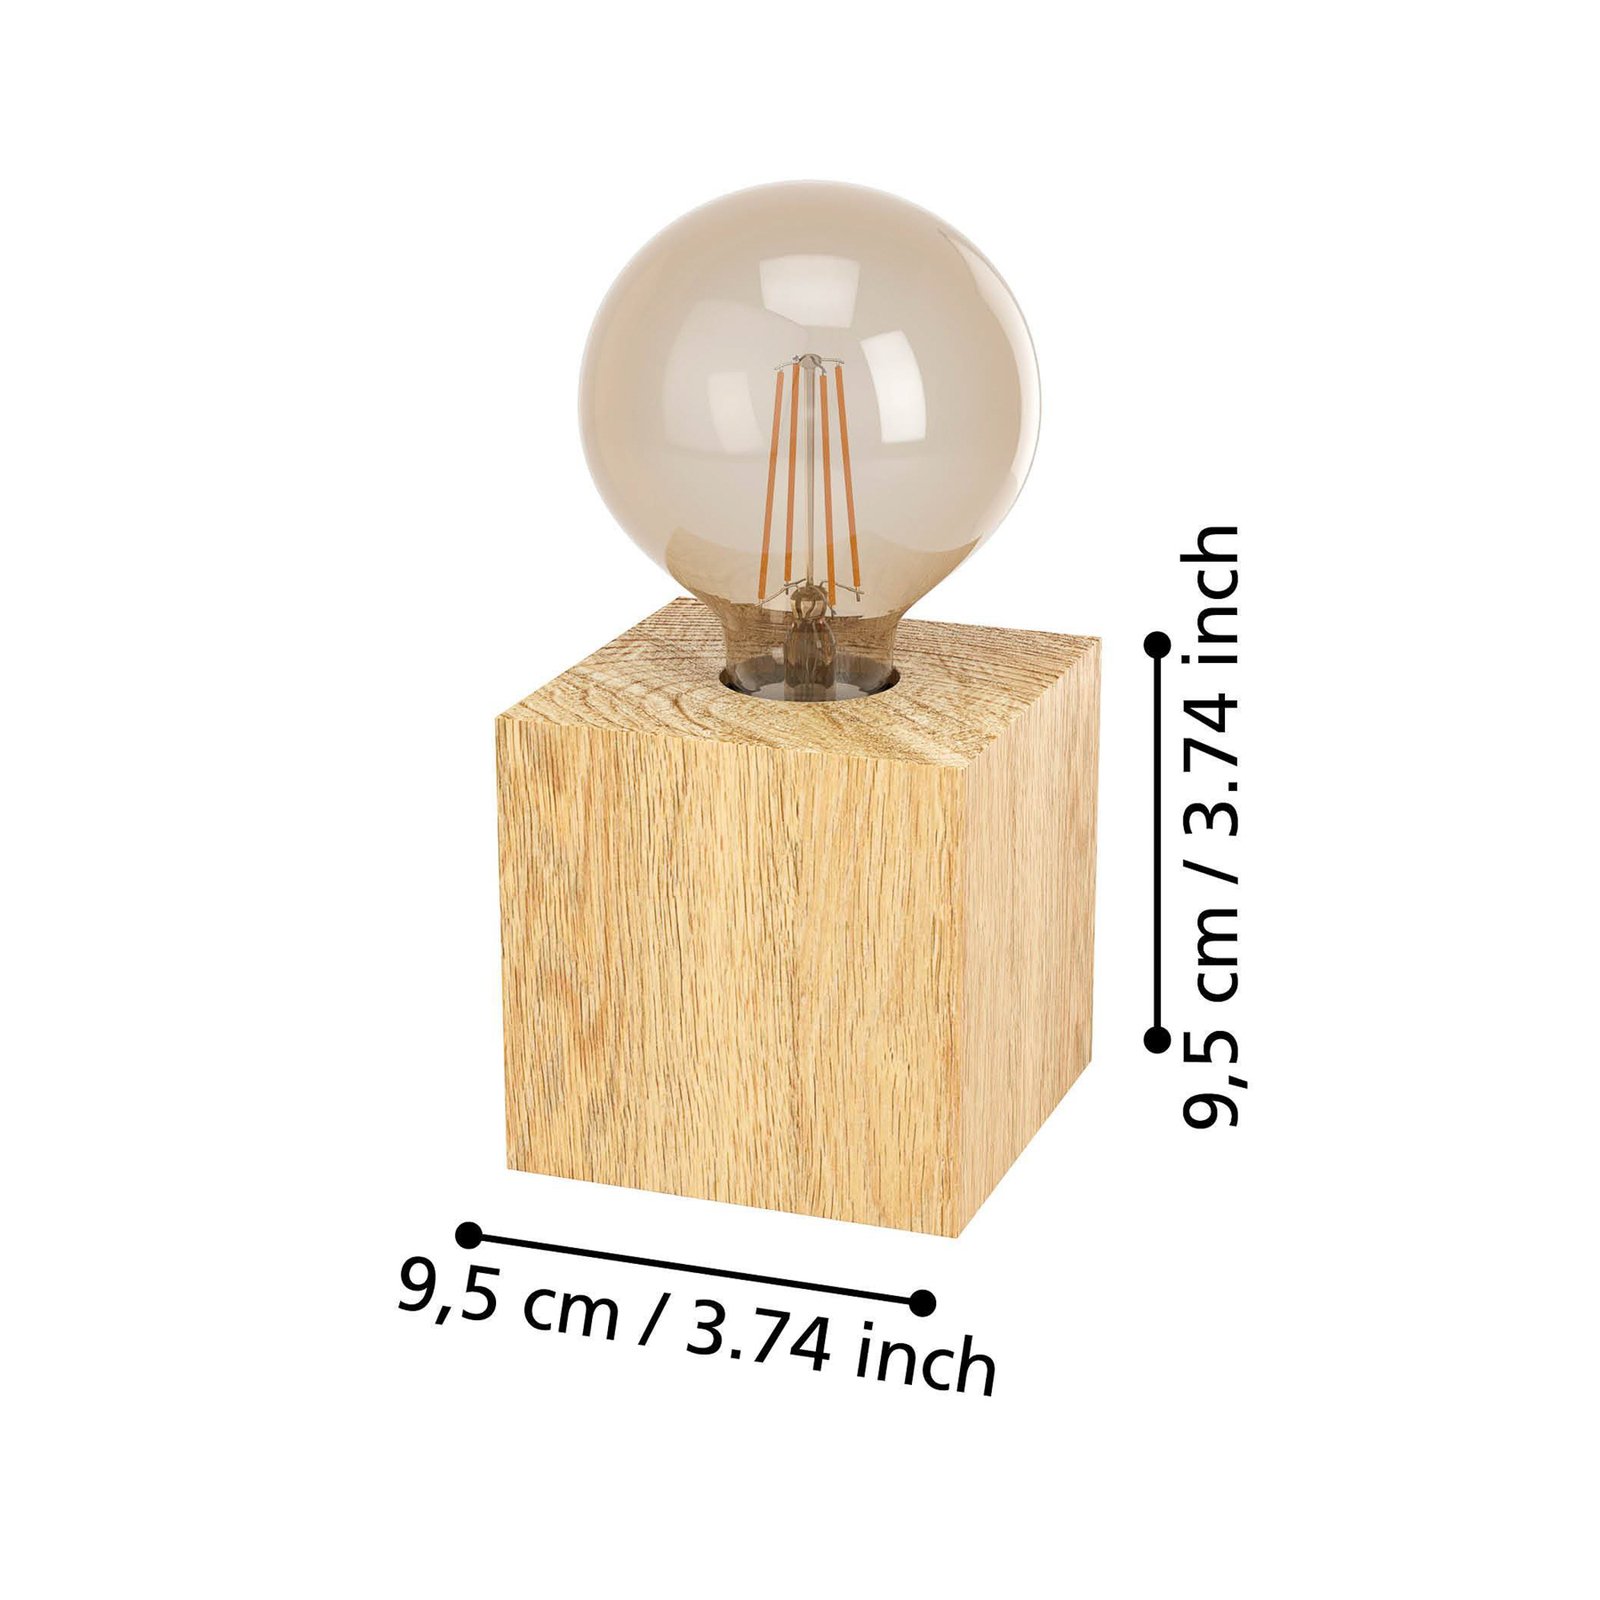 Prestwick 2 table lamp, wooden cube, natural